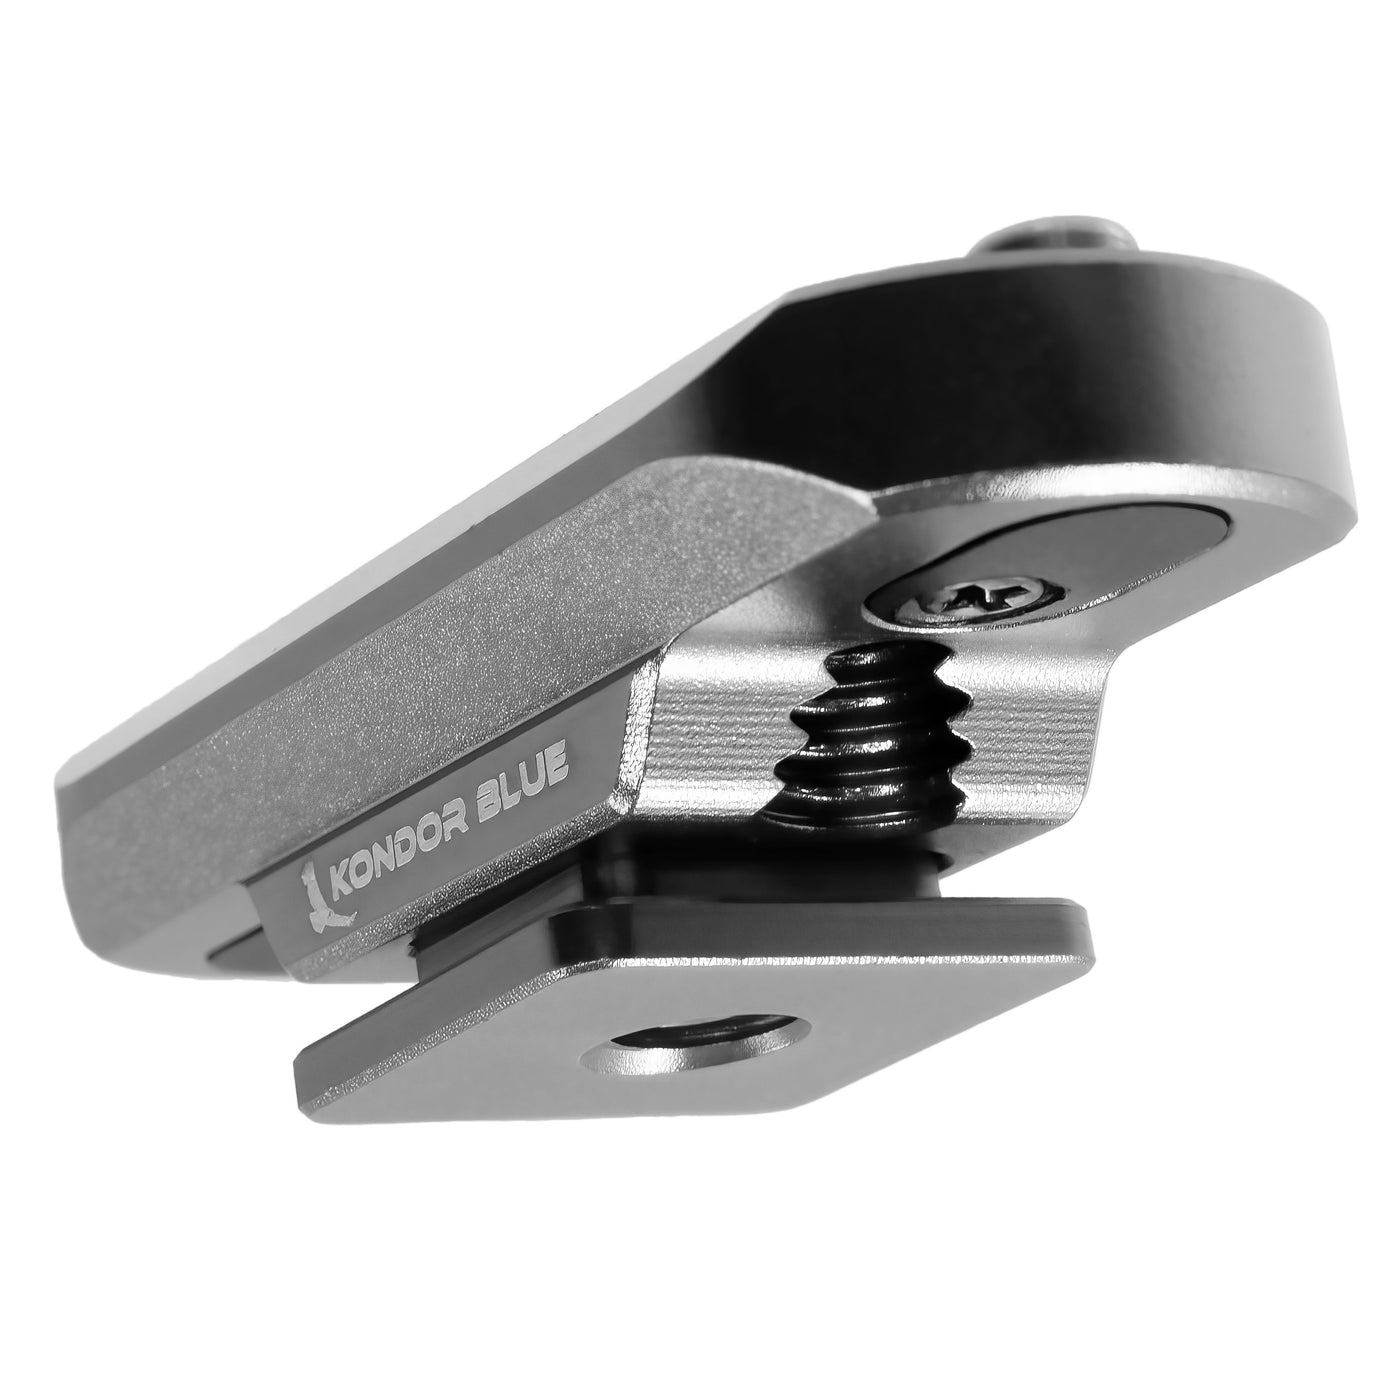 NATO Rail to Hot Shoe Adapter for Remote Trigger Top Handles